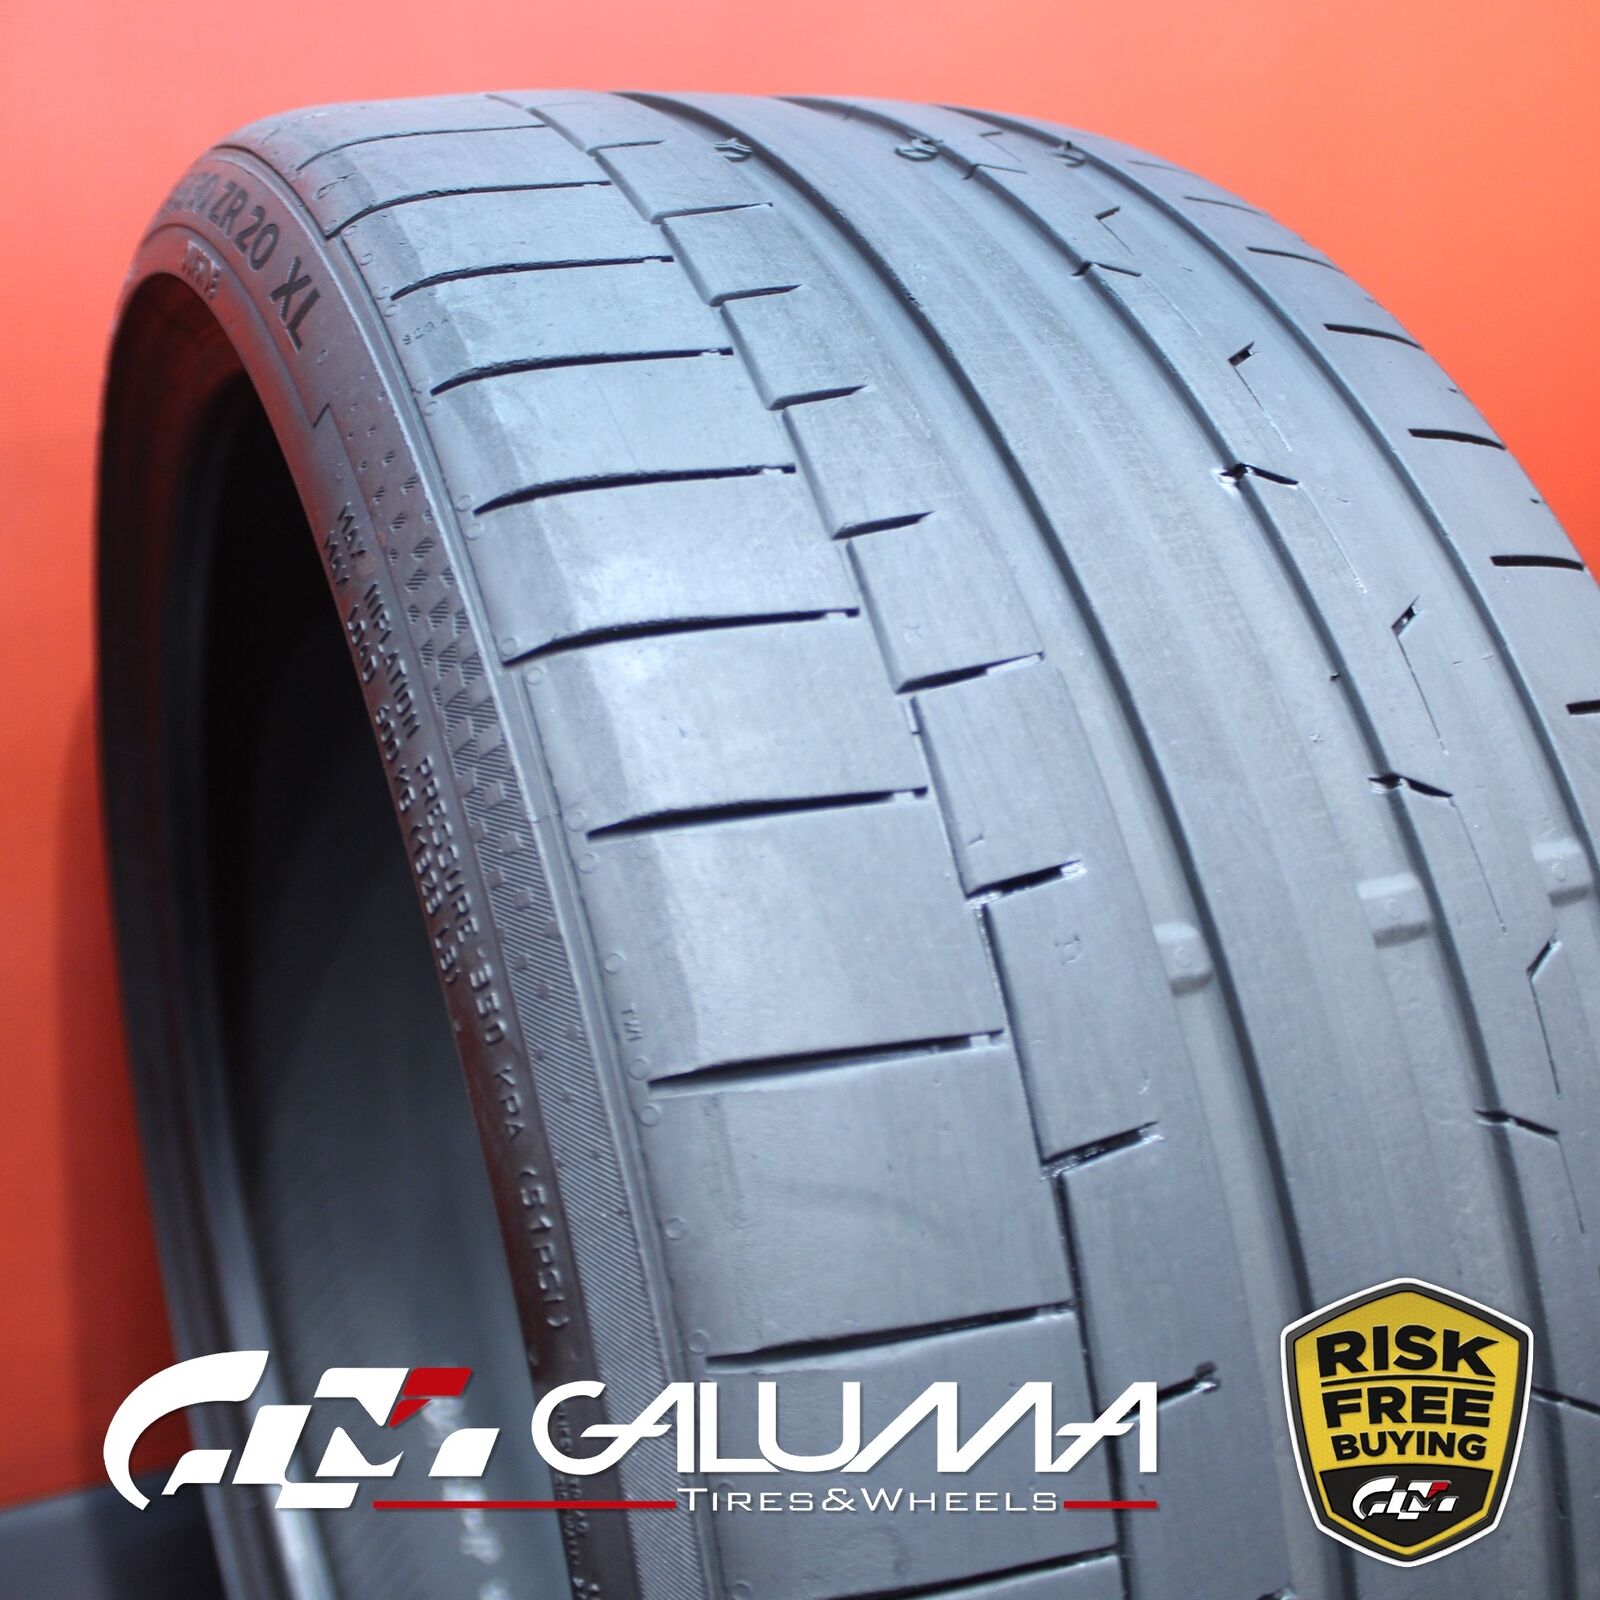 1 (One) Tire Continental SportContact 6 245/30ZR20 245/30/20 2453020 90Y #78617